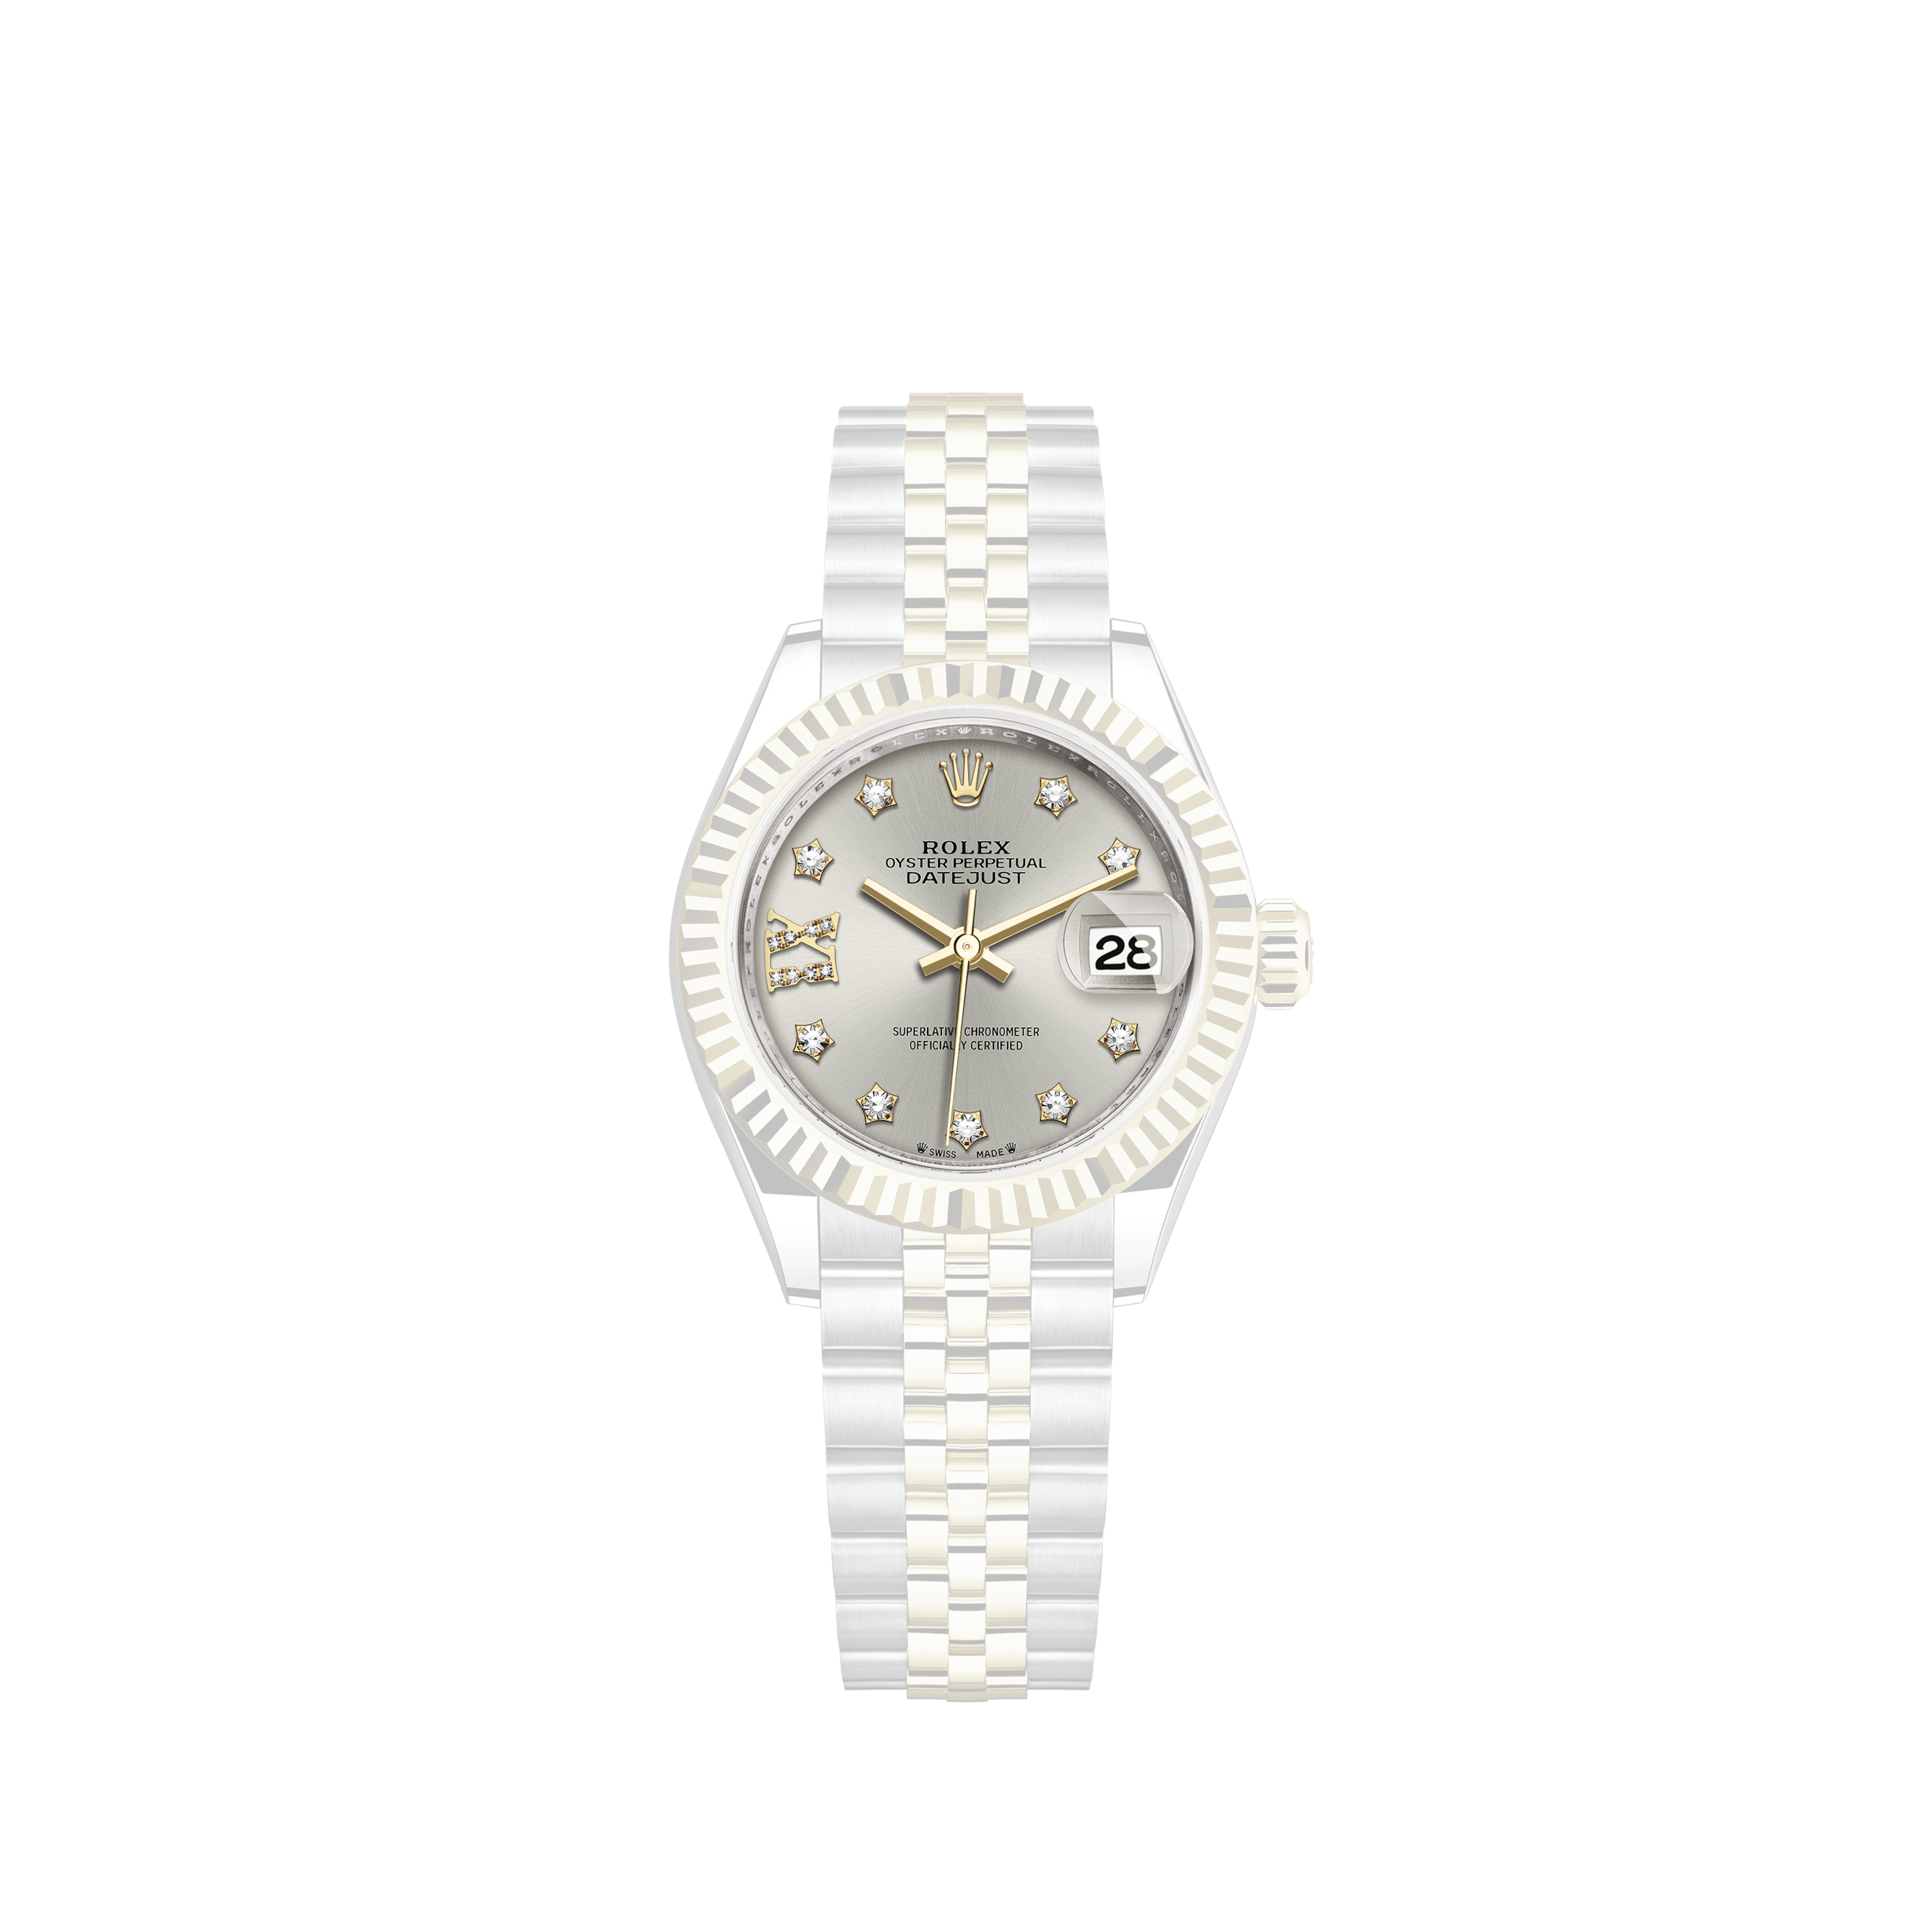 Rolex Lady-Datejust 79174, mother of pearl dial, white gold bezel, 2004 pristine